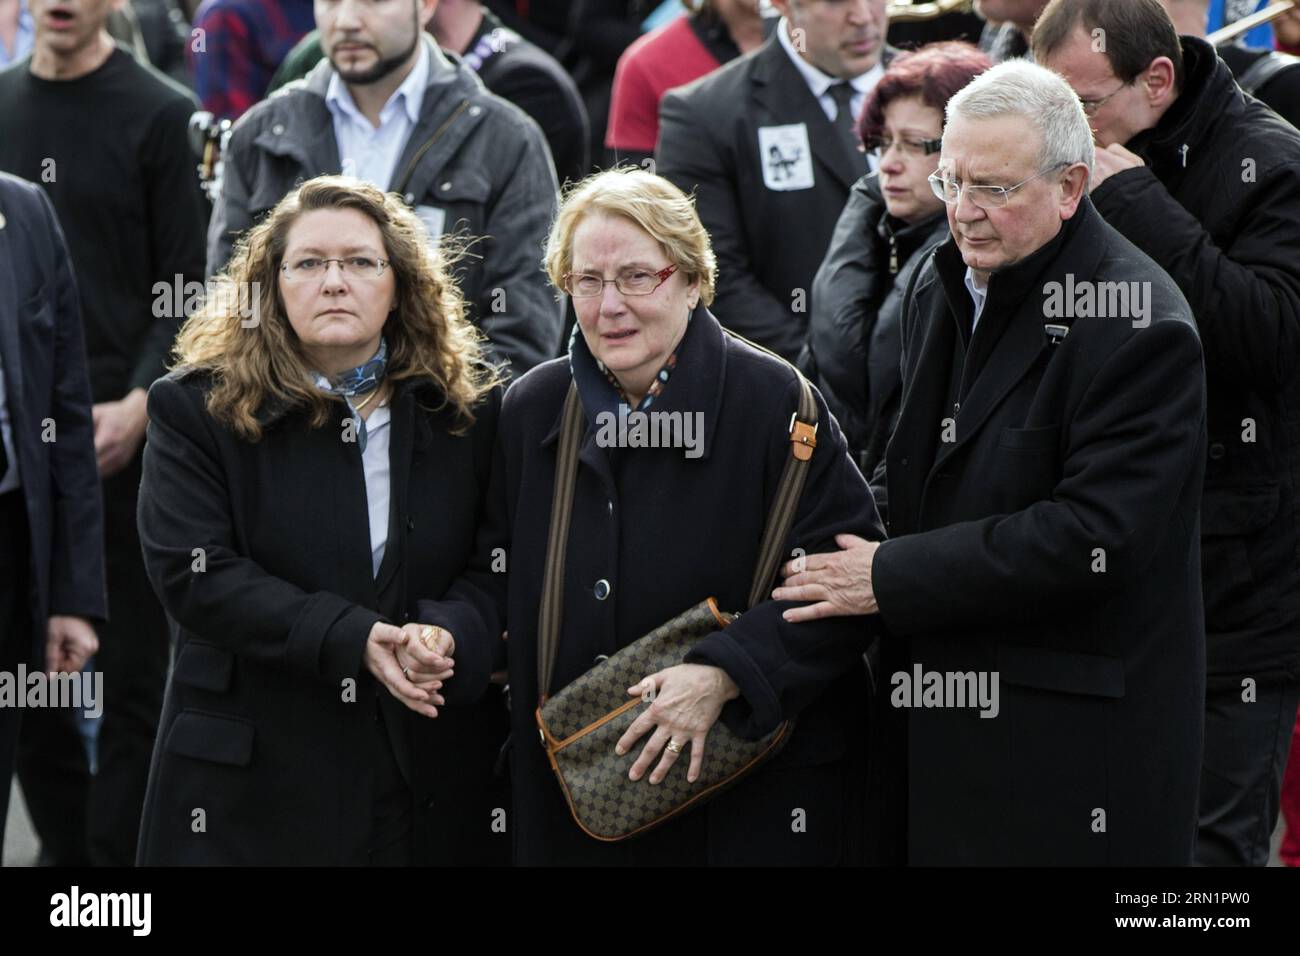 AKTUELLES ZEITGESCHEHEN Trauerfeier für Charlie Hebdo Chef Stephane Charbonnier (150116) -- PARIS, Jan. 16, 2015 -- People attend the funeral of slain Charlie Hebdo editor-in-chief Stephane Charbonnier (who publishes under the pen name Charb) in Pontoise, outside Paris, Jan. 16, 2015. ) FRANCE-PONTOISE-CHARB-FUNERAL JosexRodriguez PUBLICATIONxNOTxINxCHN   News Current events Mourning ceremony for Charlie Hebdo Boss Stephane Charbonnier  Paris Jan 16 2015 Celebrities attend The Funeral of Slain Charlie Hebdo Editor in Chief Stephane Charbonnier Who  Under The Pen Name Charbs in Pontoise outside Stock Photo